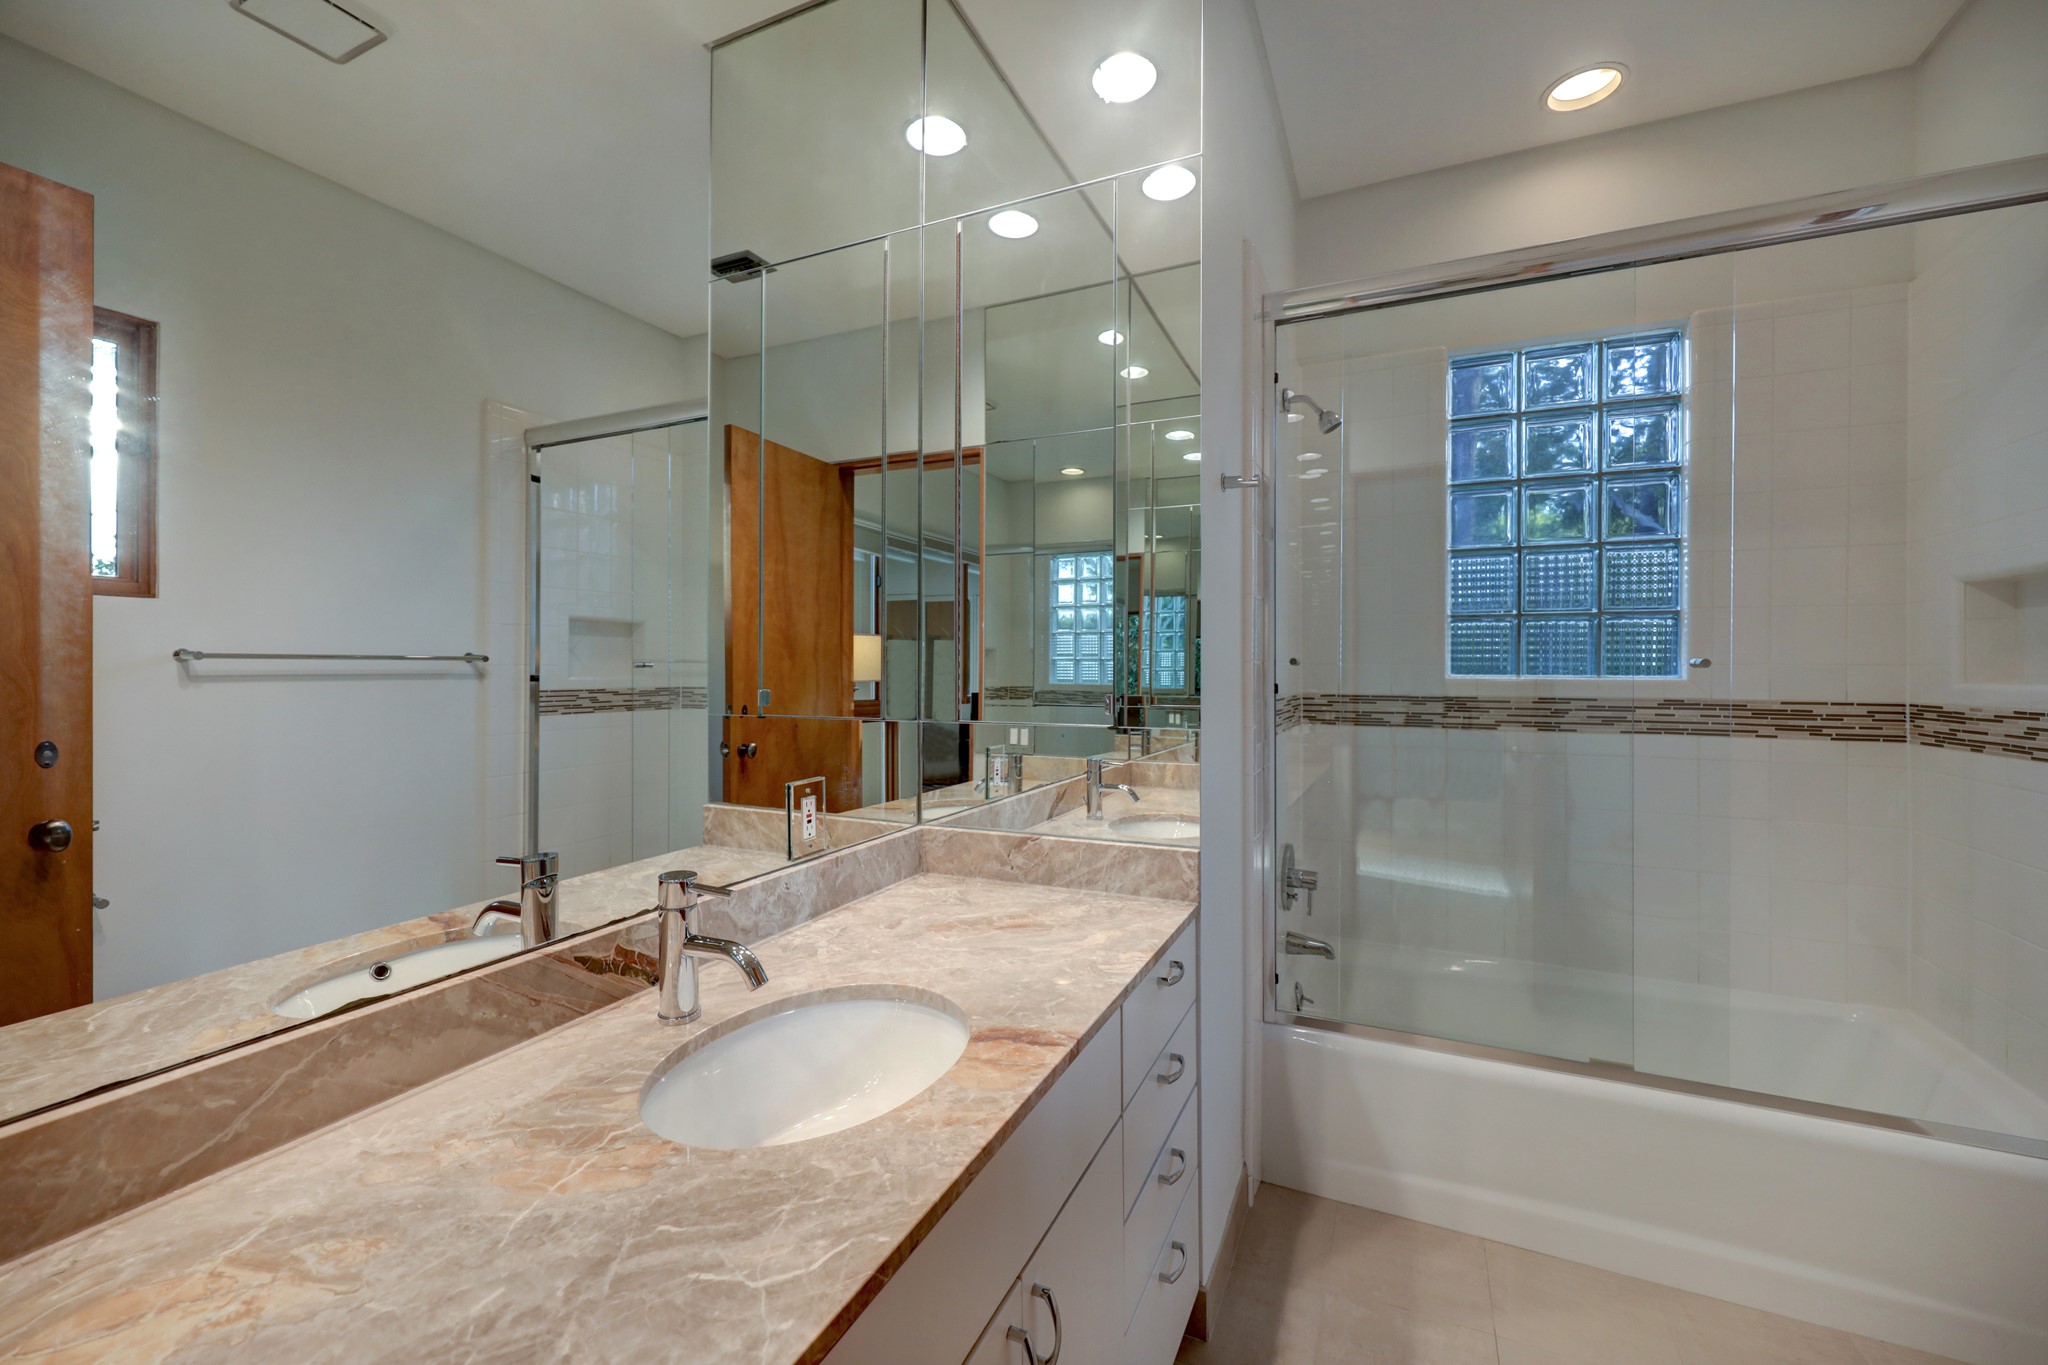 Second full ensuite bathroom features, marble countertop, custom cabinets, wall-to wall mirror, a shower-tub combination with a shampoo niche